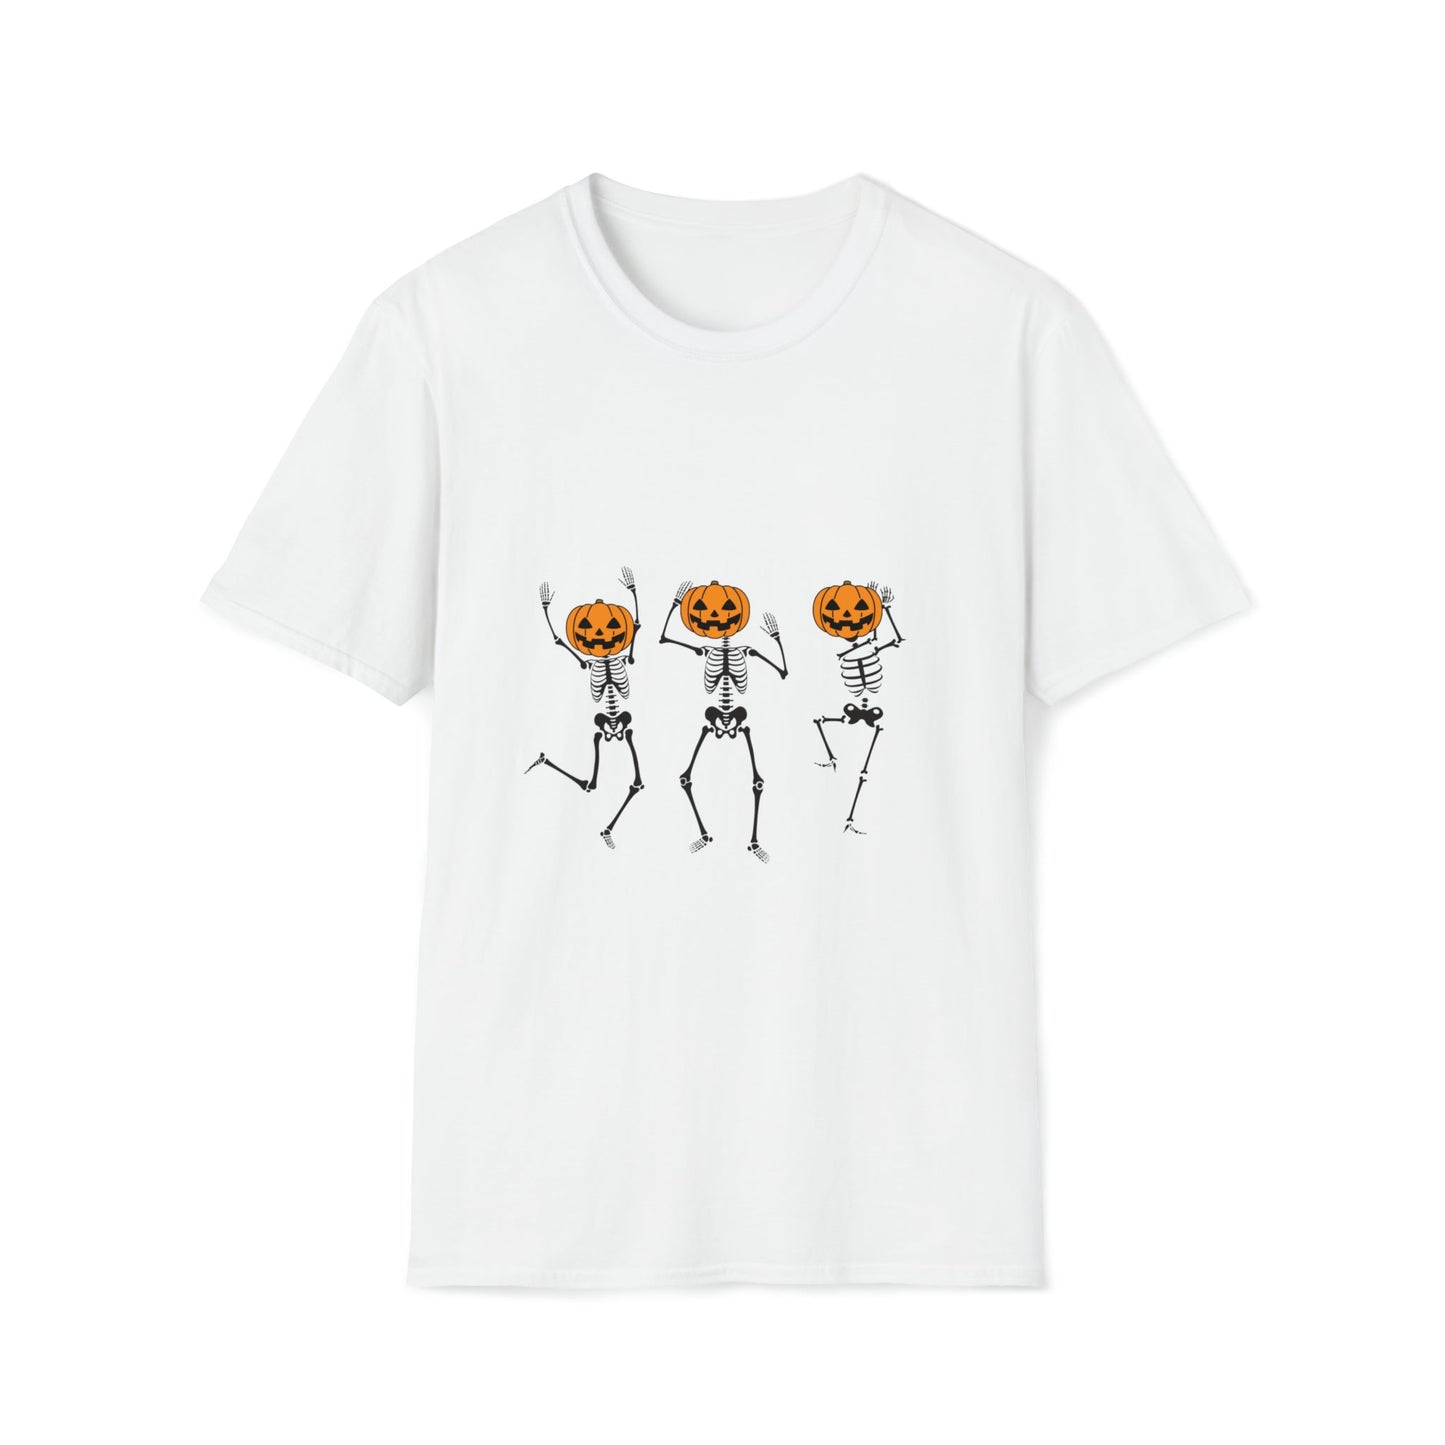 Get trendy with Dancing Skeletons  T-Shirt - T-Shirt available at Good Gift Company. Grab yours for $18.95 today!